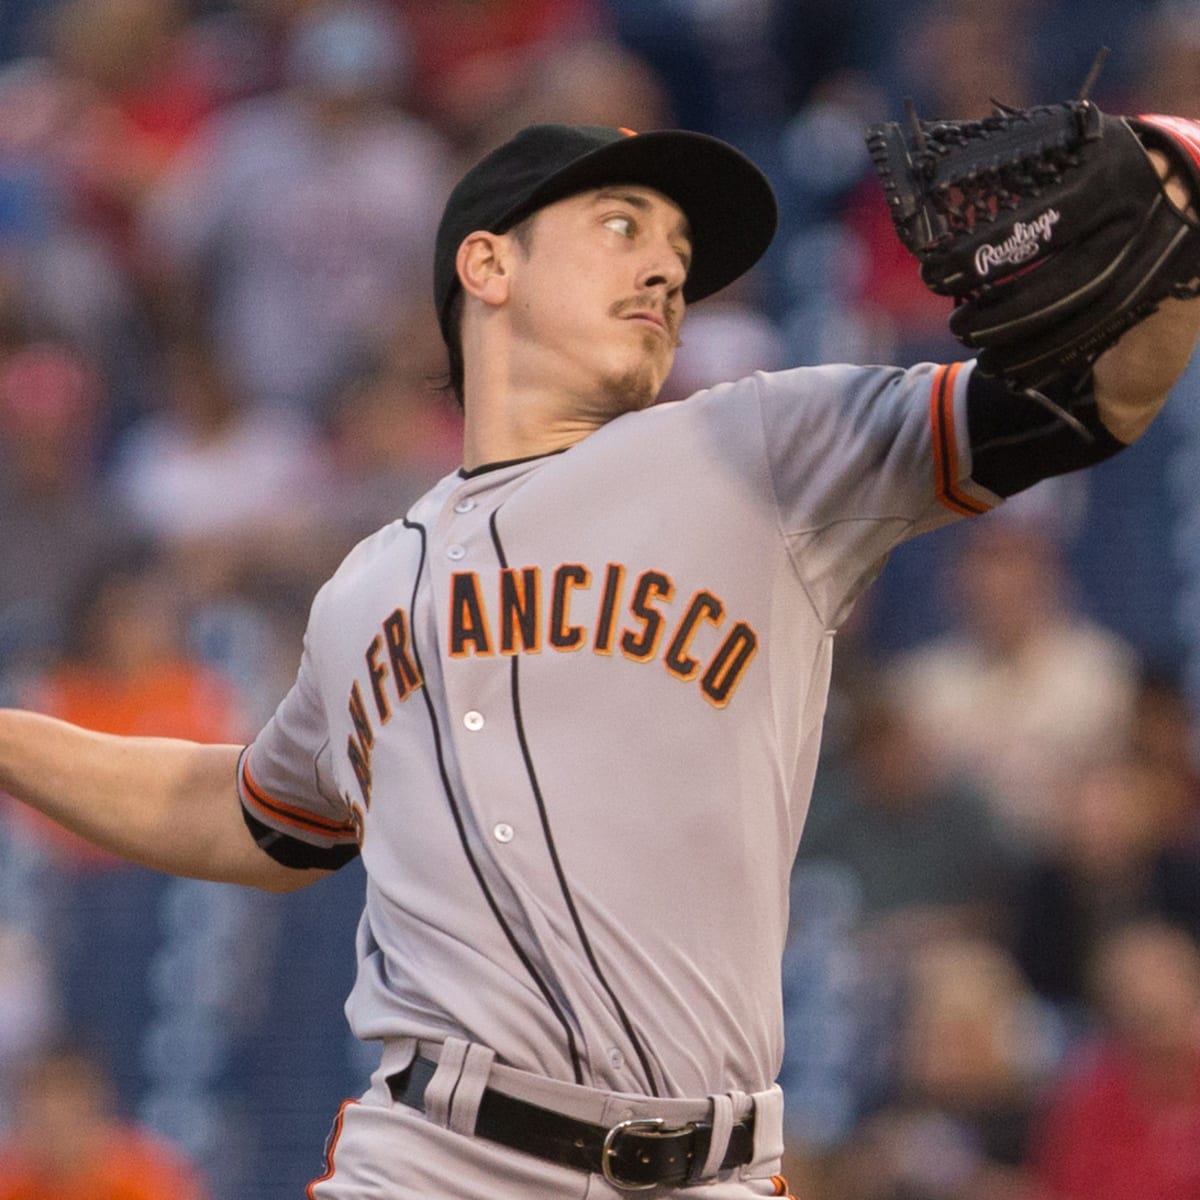 Giants Announce Tim Lincecum's Wife, Cristin Coleman, Has Died